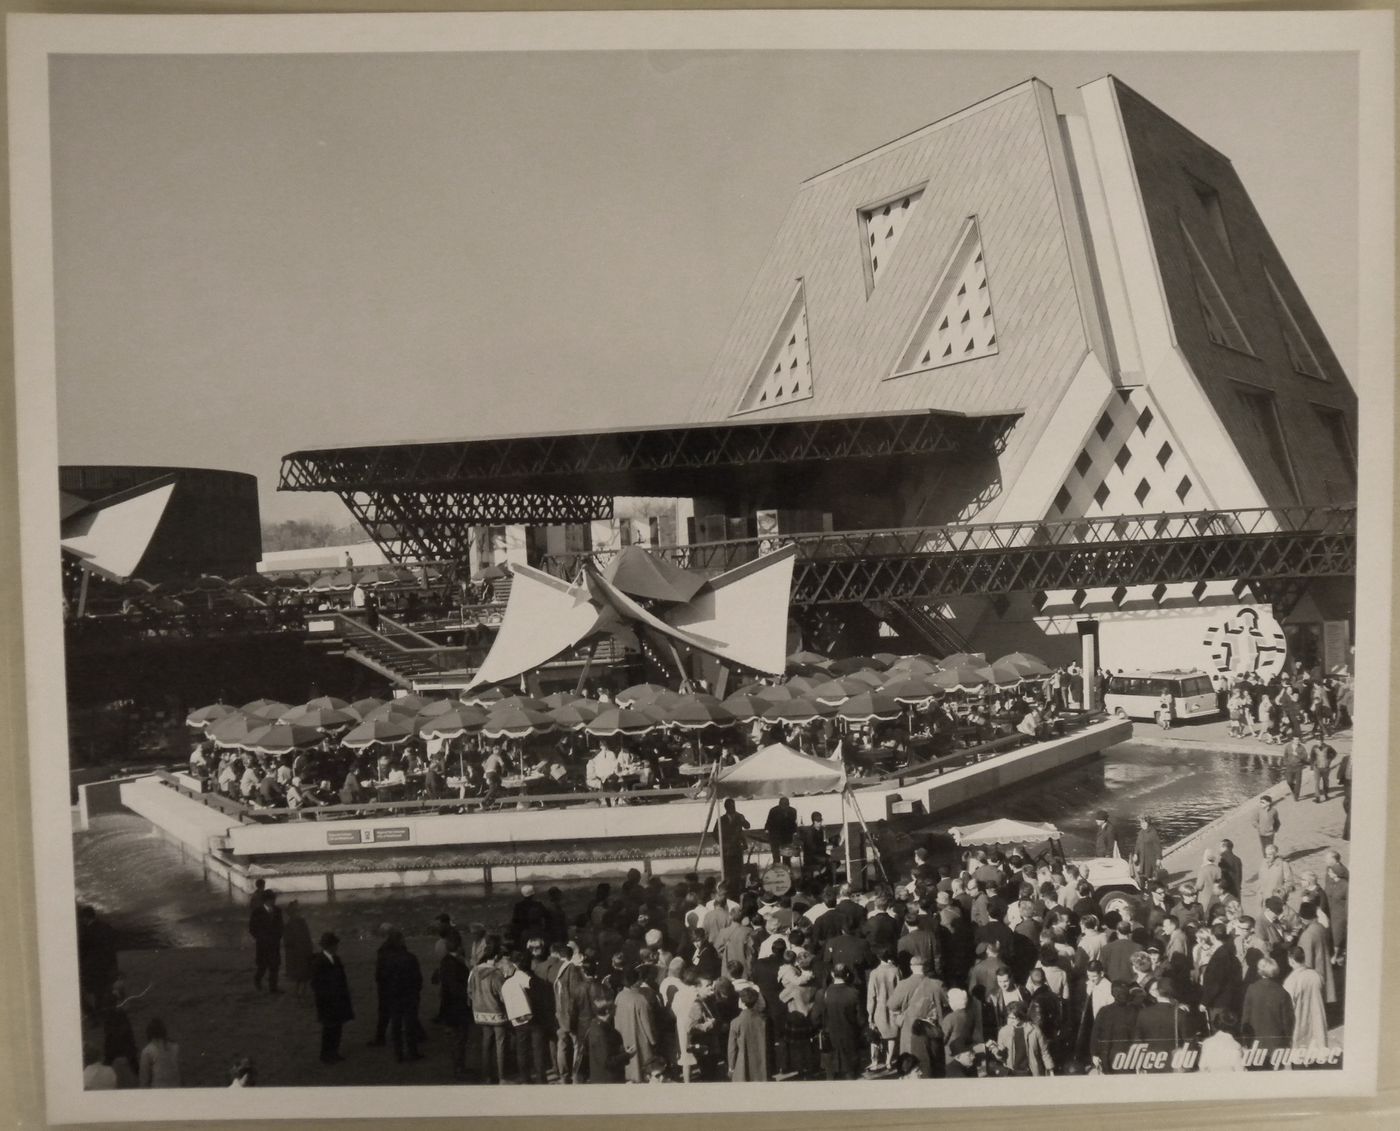 View of a terrace and of a music band at the Plaza of the Universe near the Man the Explorer Pavilion, Expo 67, Montréal, Québec